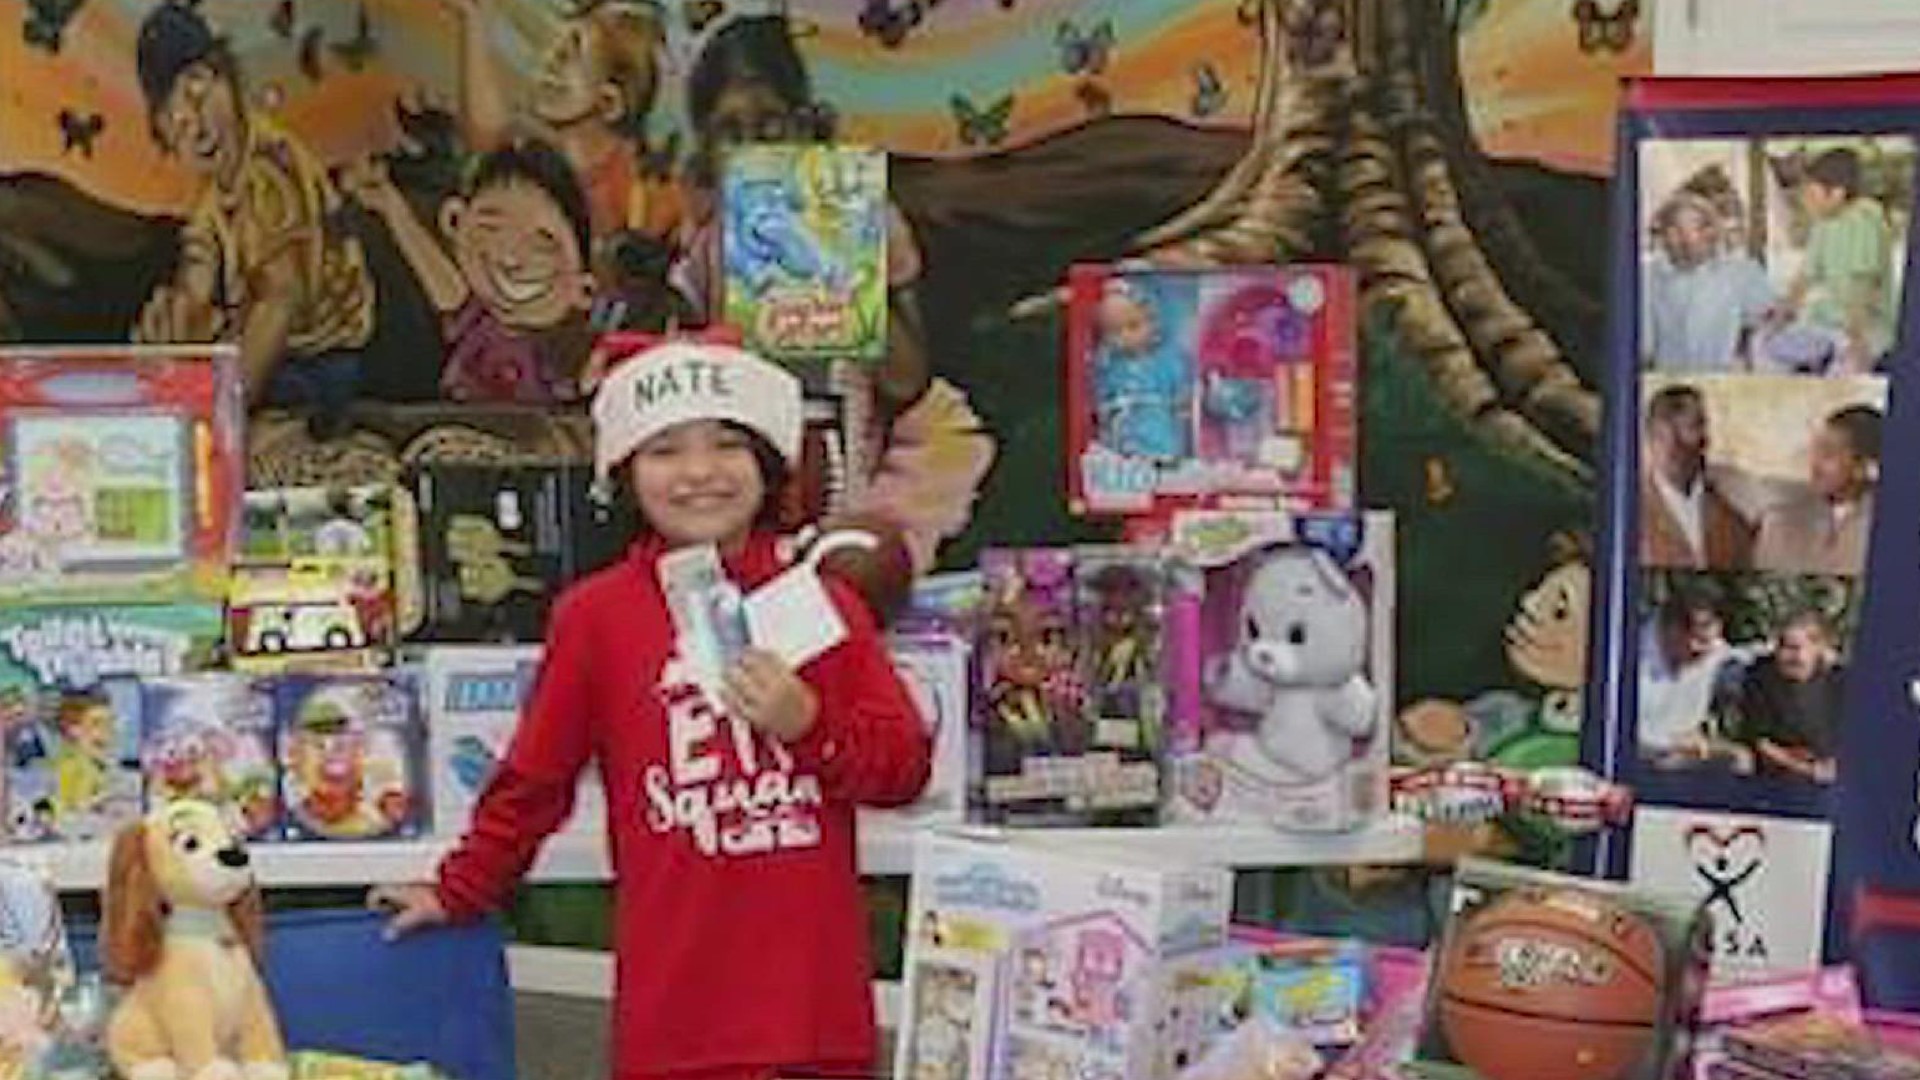 Nate's Next Kid Up program has one goal in mind: get as many toys as possible, so every child can have a Merry Christmas.